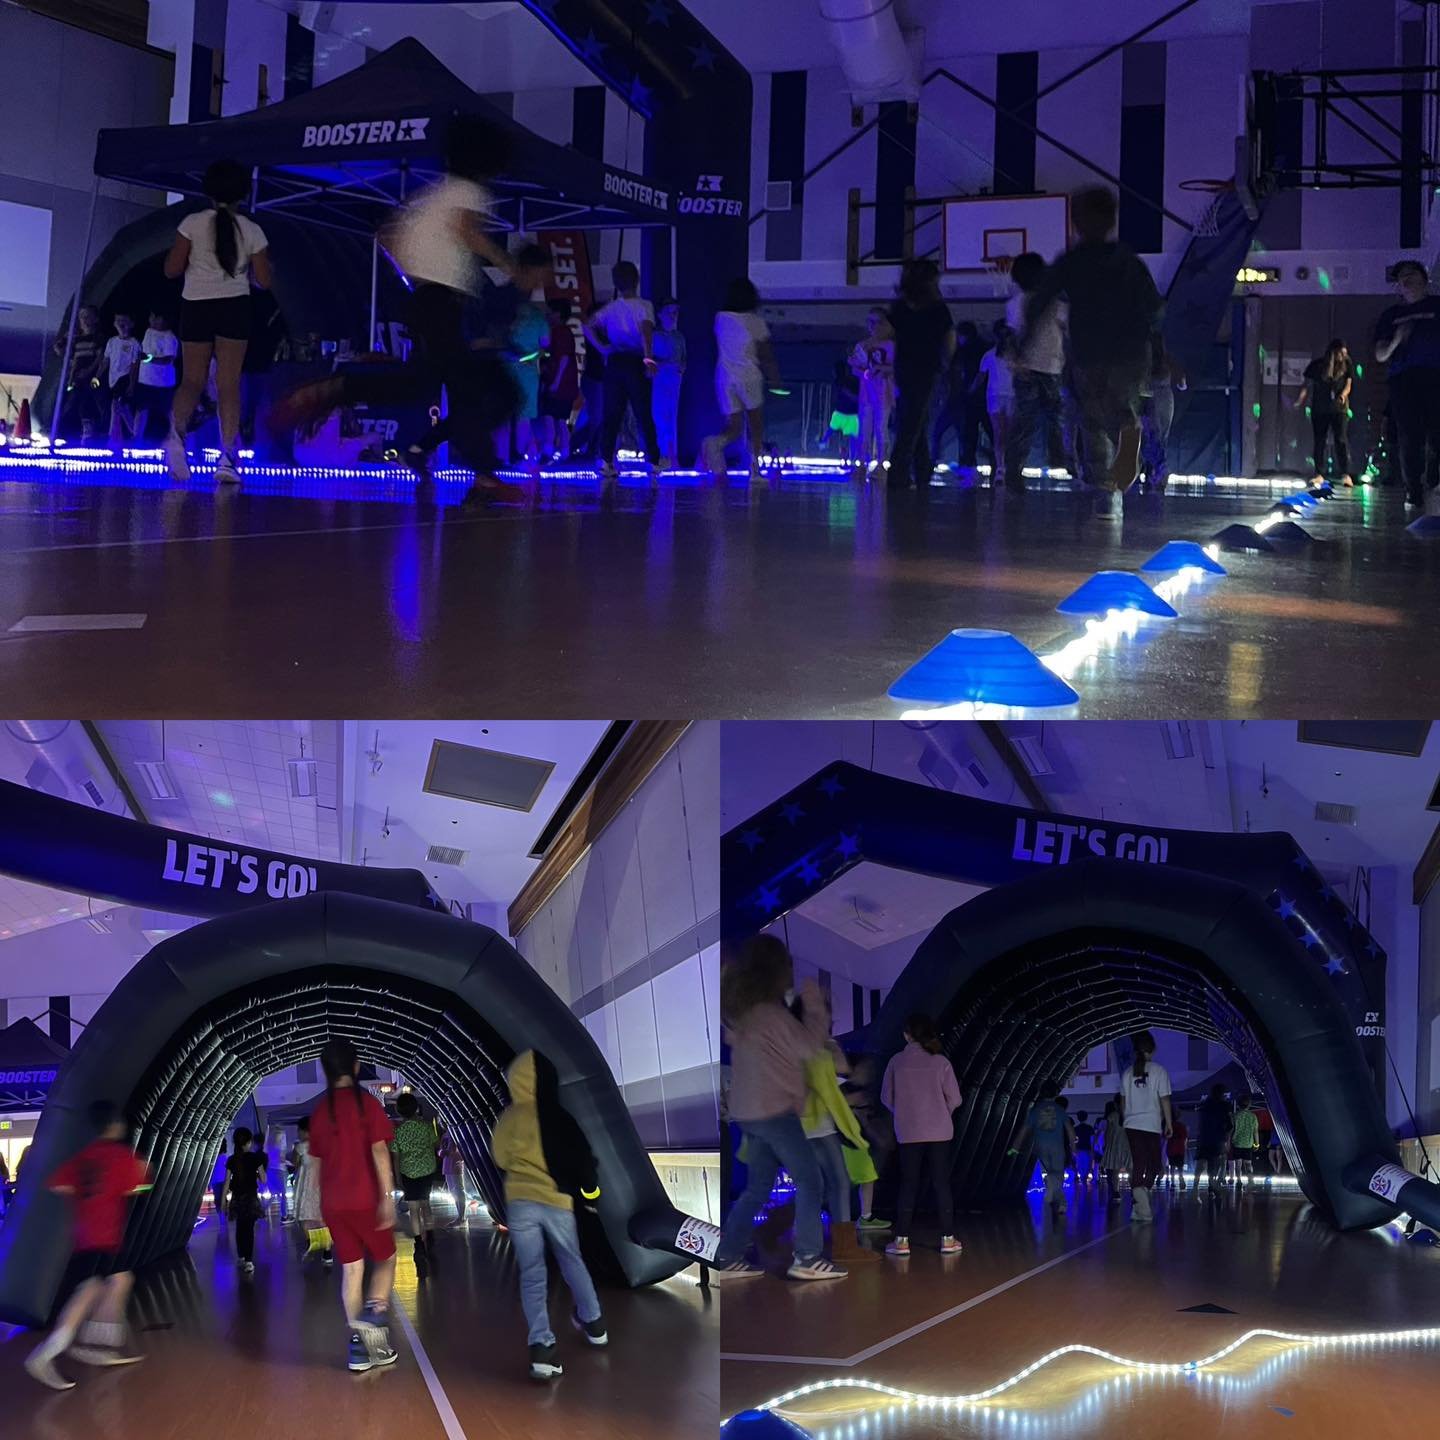 Some fun pics of the Glow Run happening today! 🤩